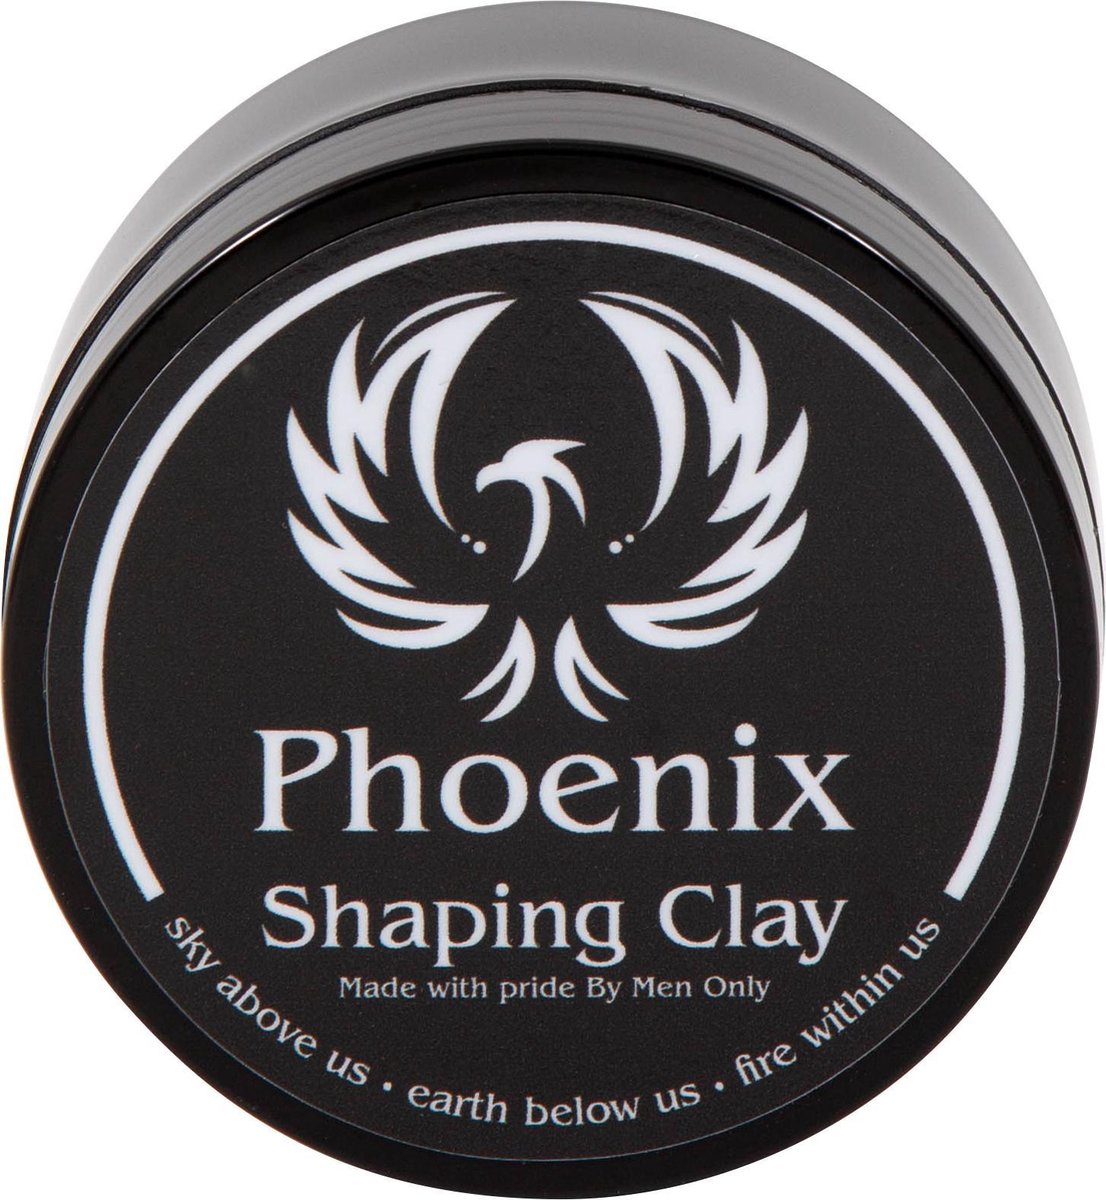 Phoenix Shaping Clay - Styling klei - Matte look - Volume - 100ML - Phoenix Hair Products